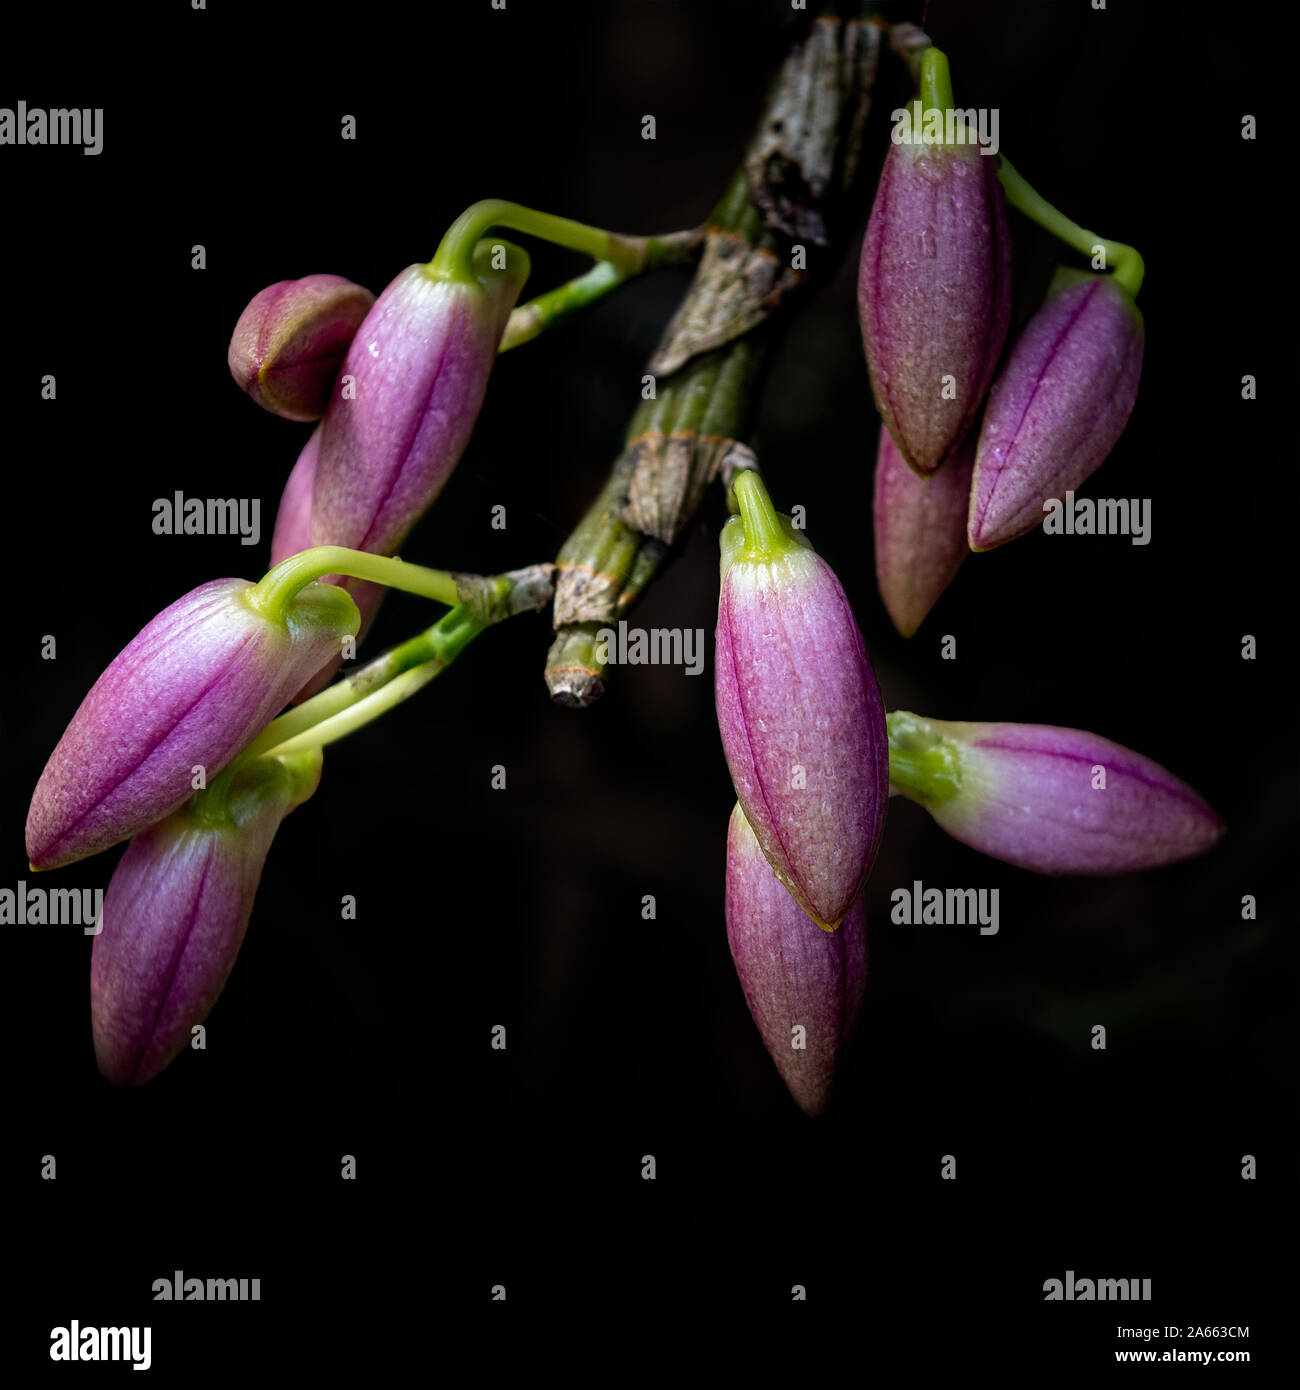 Closed Laelia orchid blossoms in nature on dark background, close-up Stock Photo